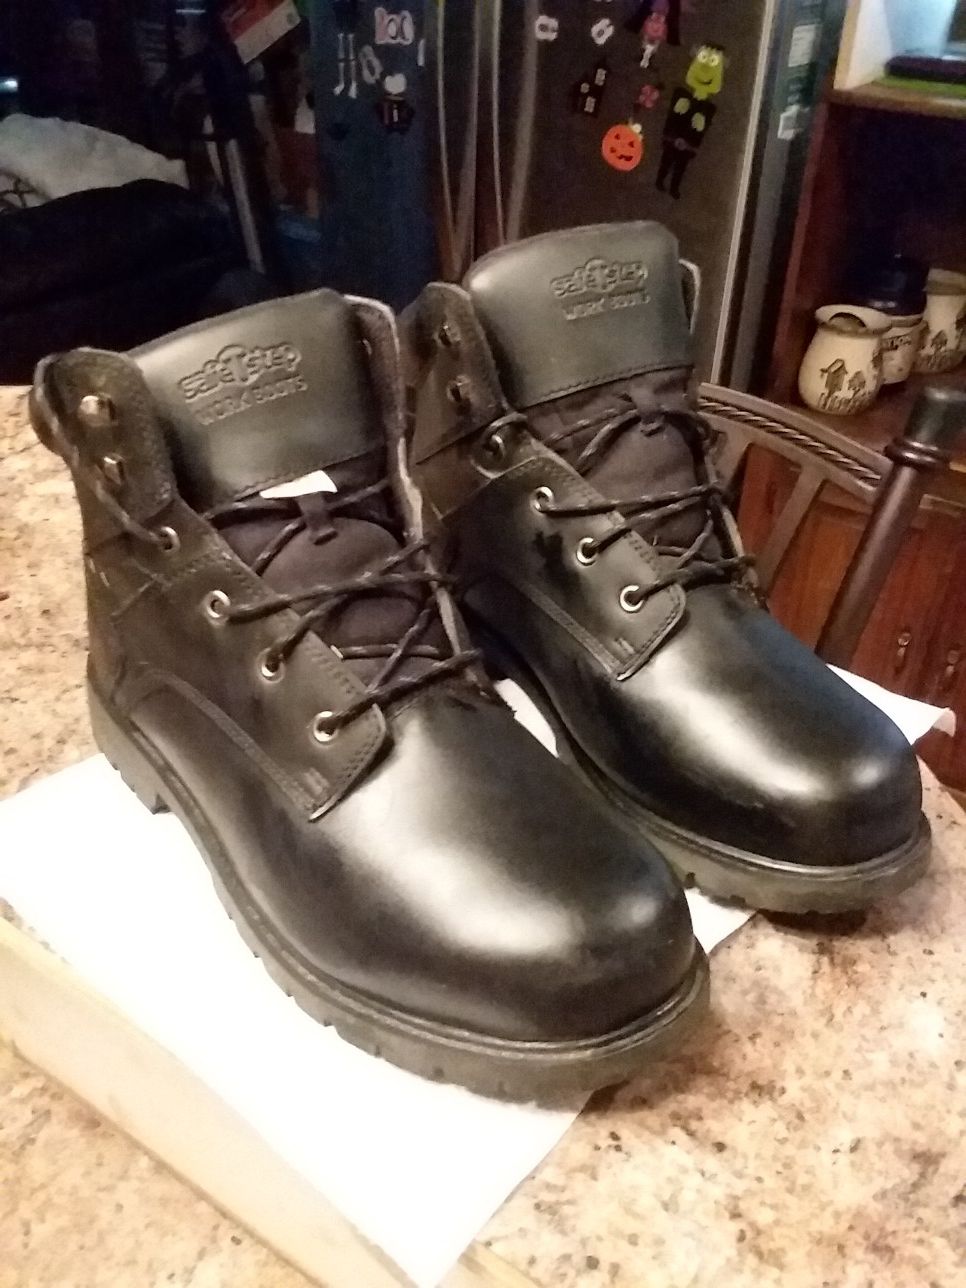 Men's Steal Toe Work Boots Size 14 Worn Once!!